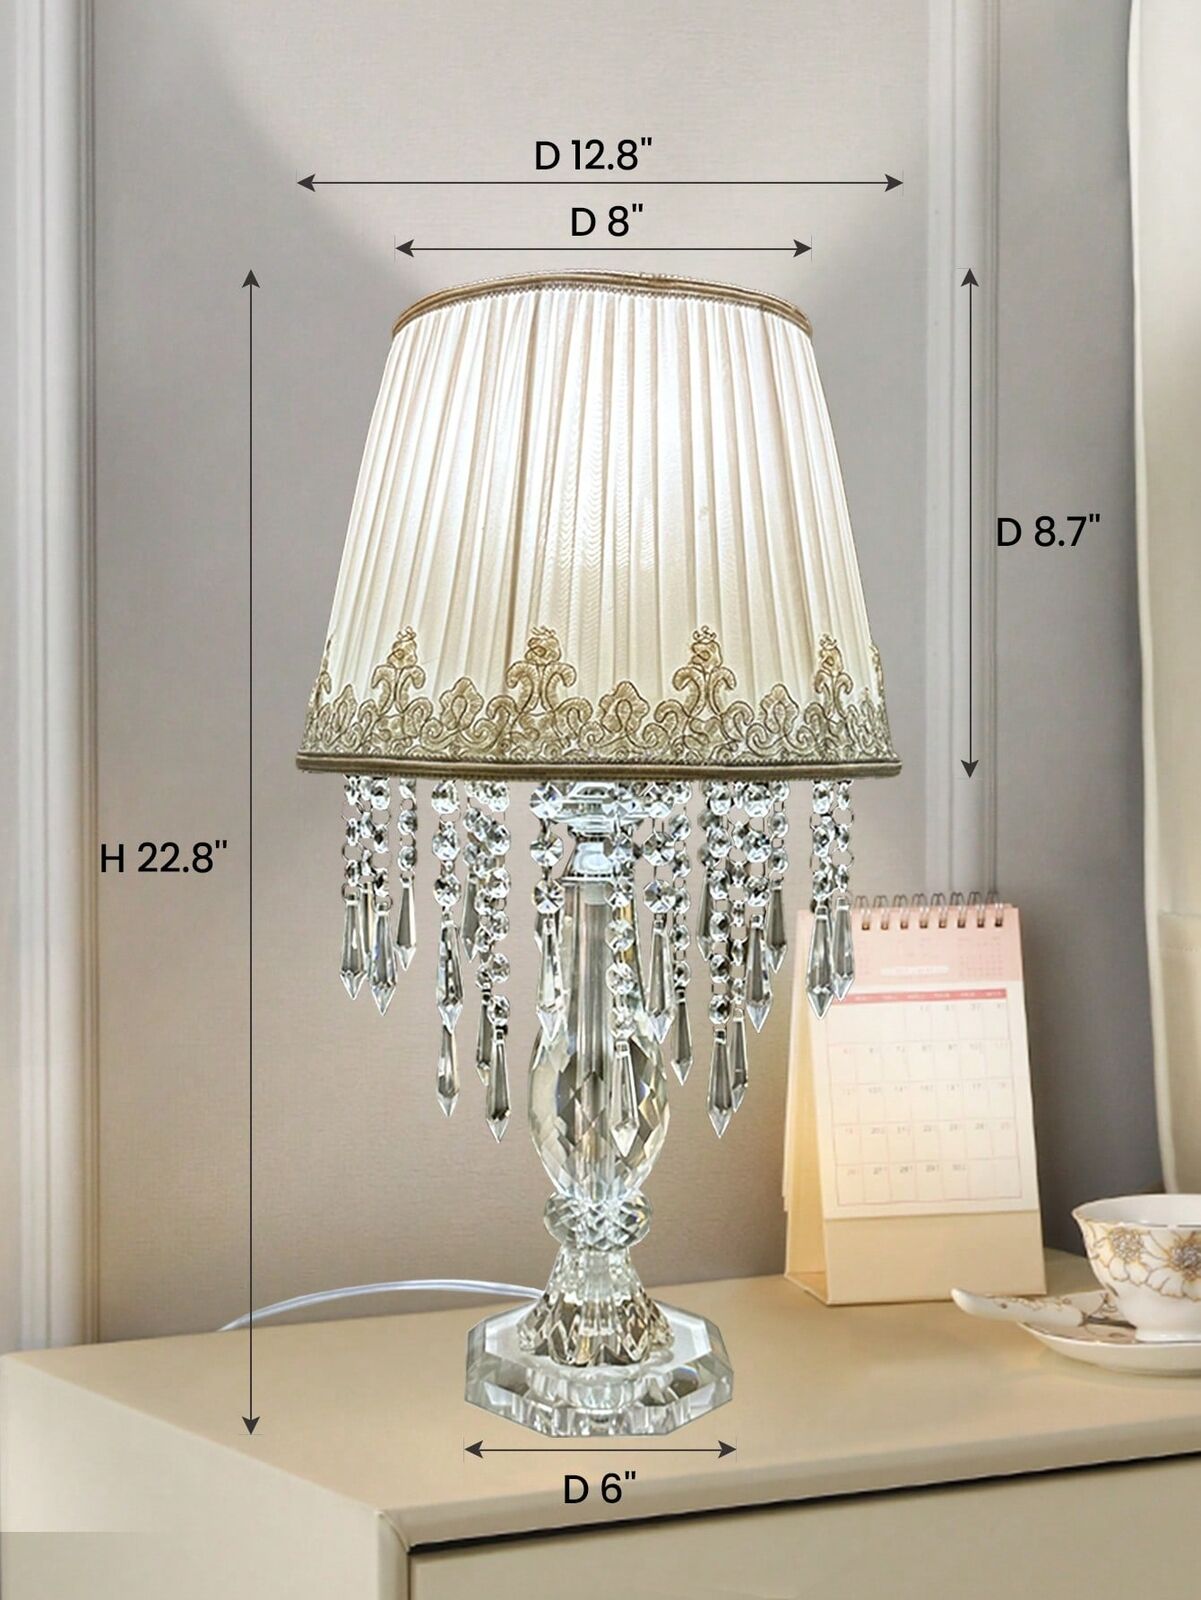 Crystal Table Lamps Set Of 2 With Dimmer Switch,Elegant Crystal Bedside Lamps